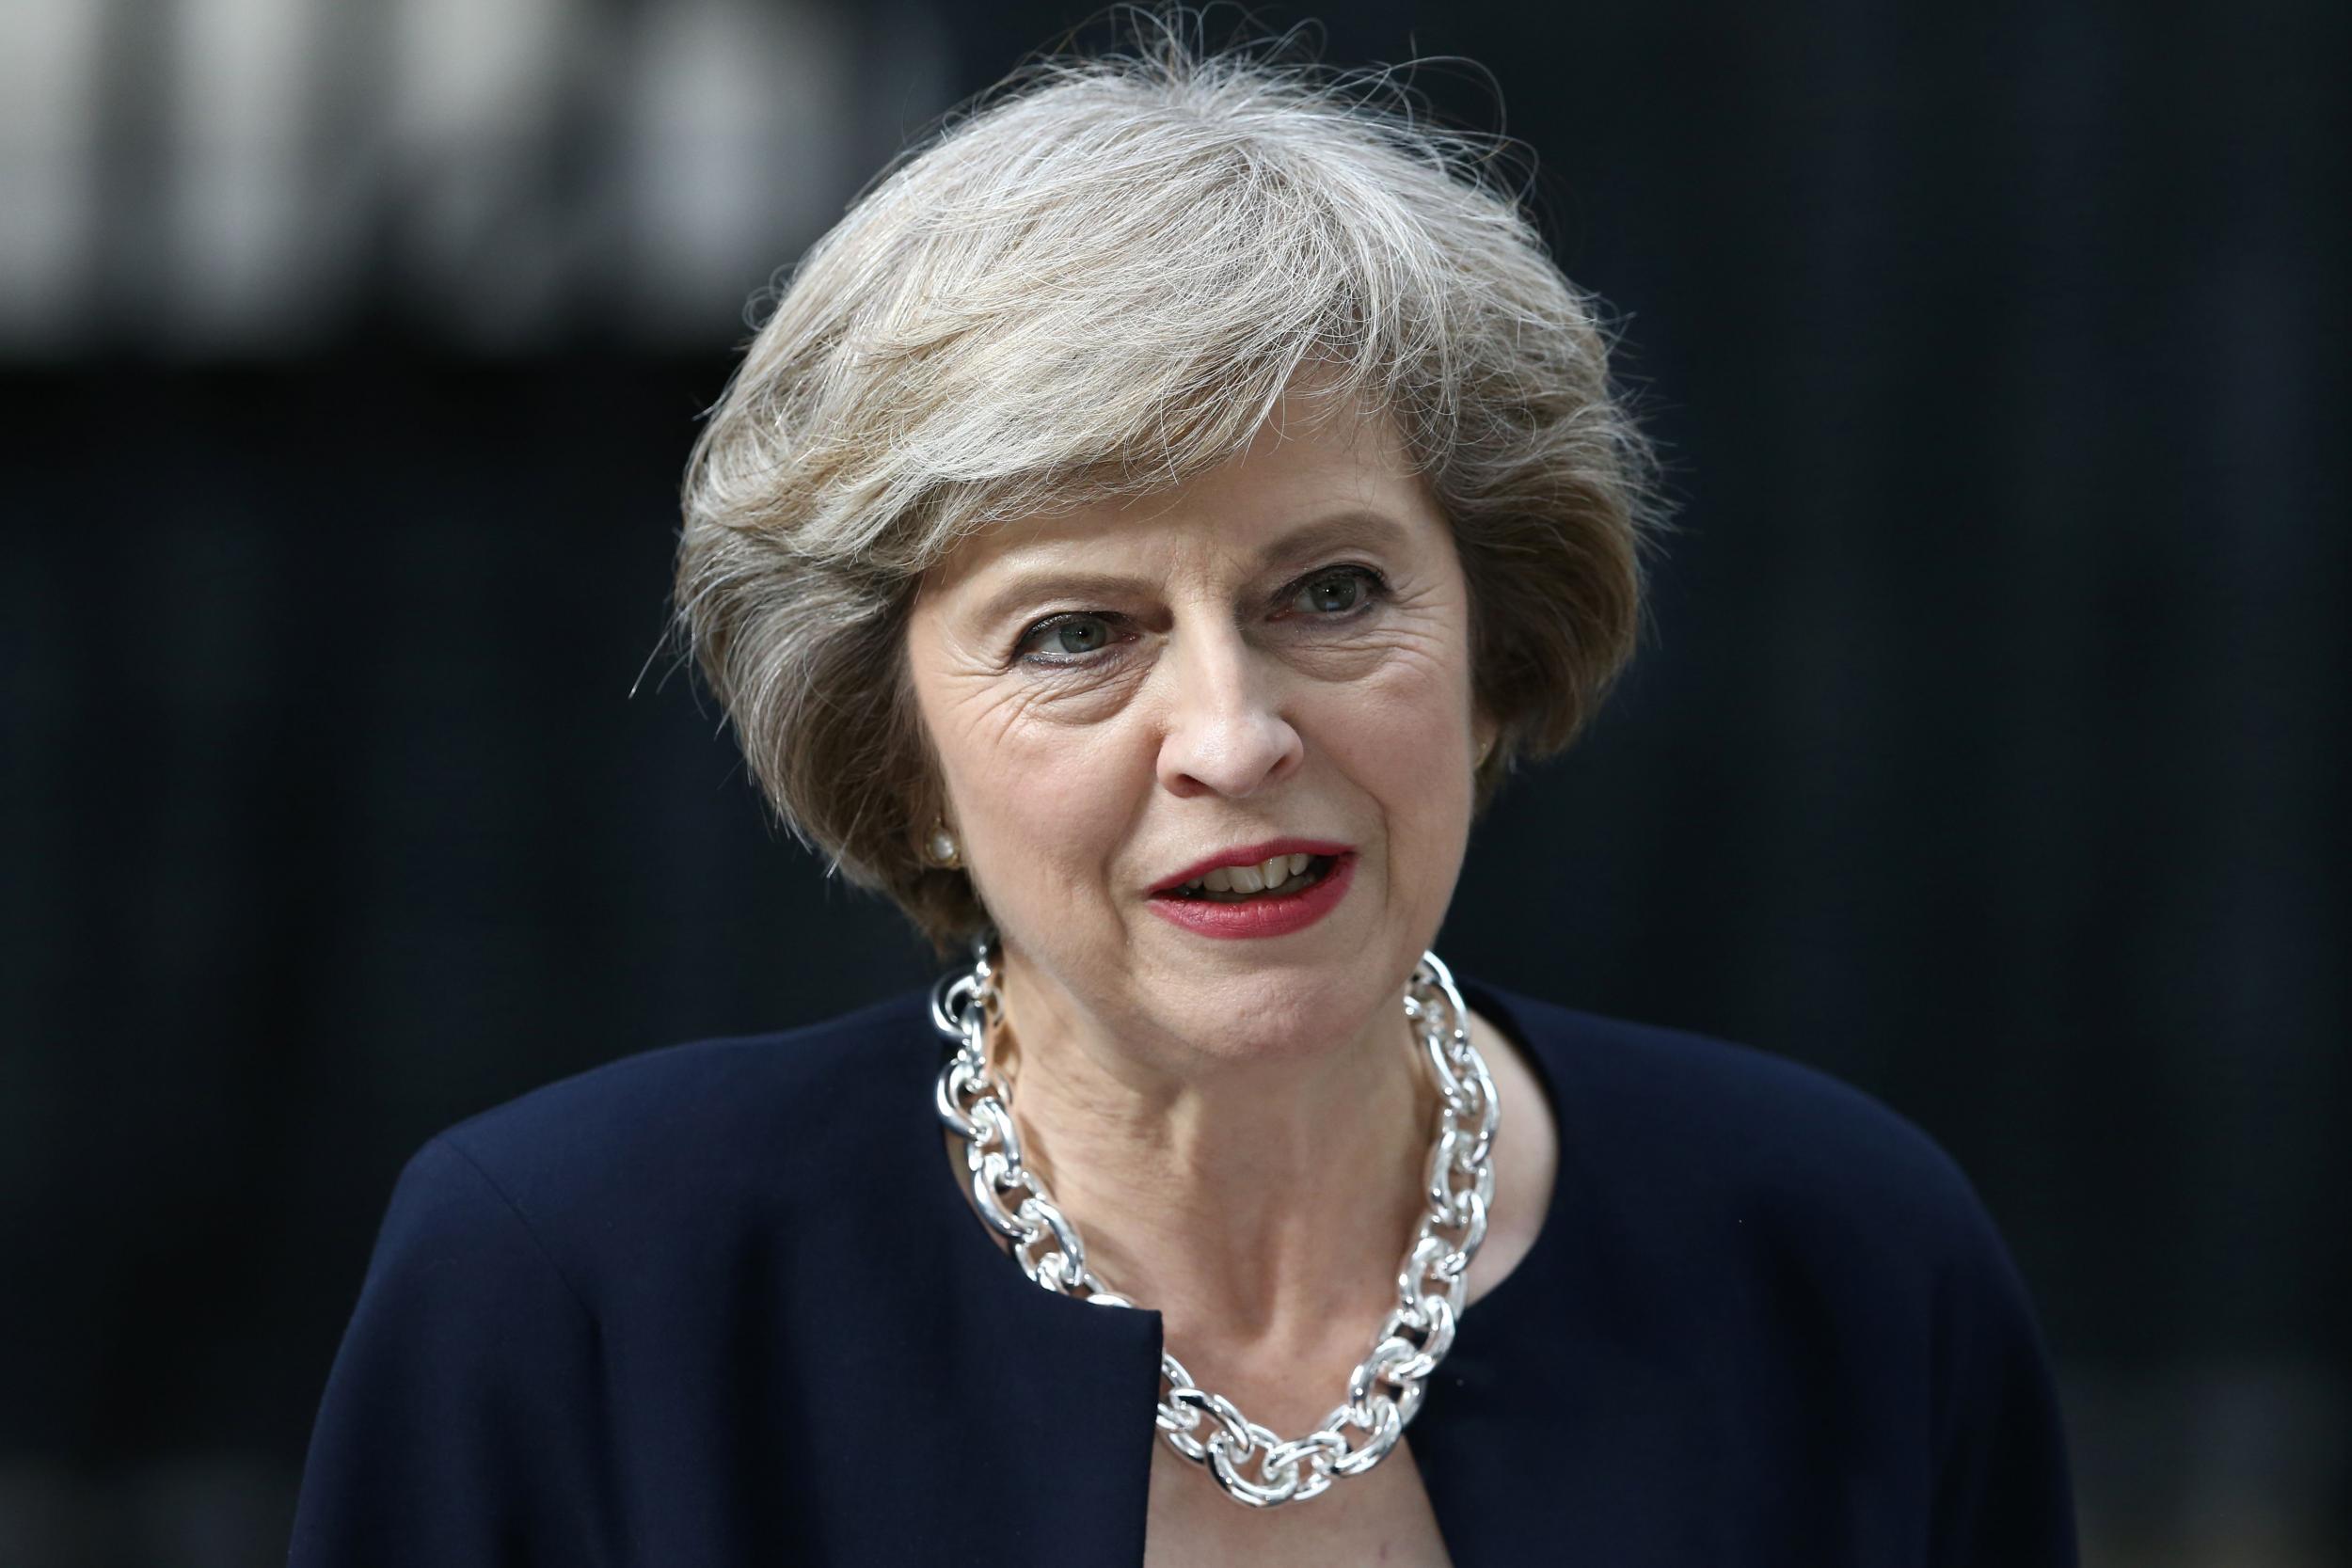 Theresa May has refused to give Parliament a vote on triggering Article 50